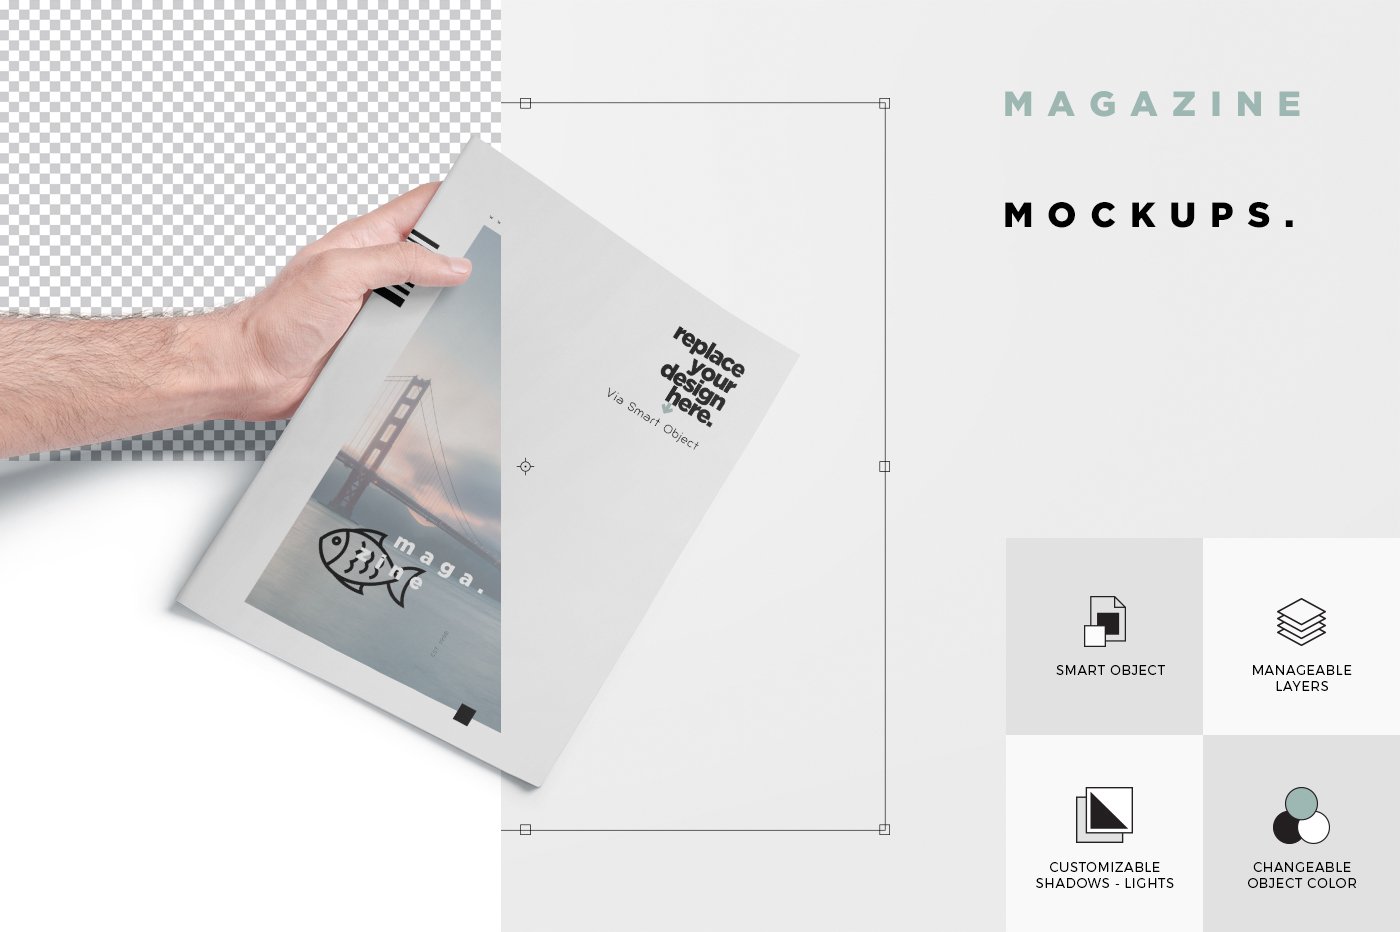 mockup features image 388